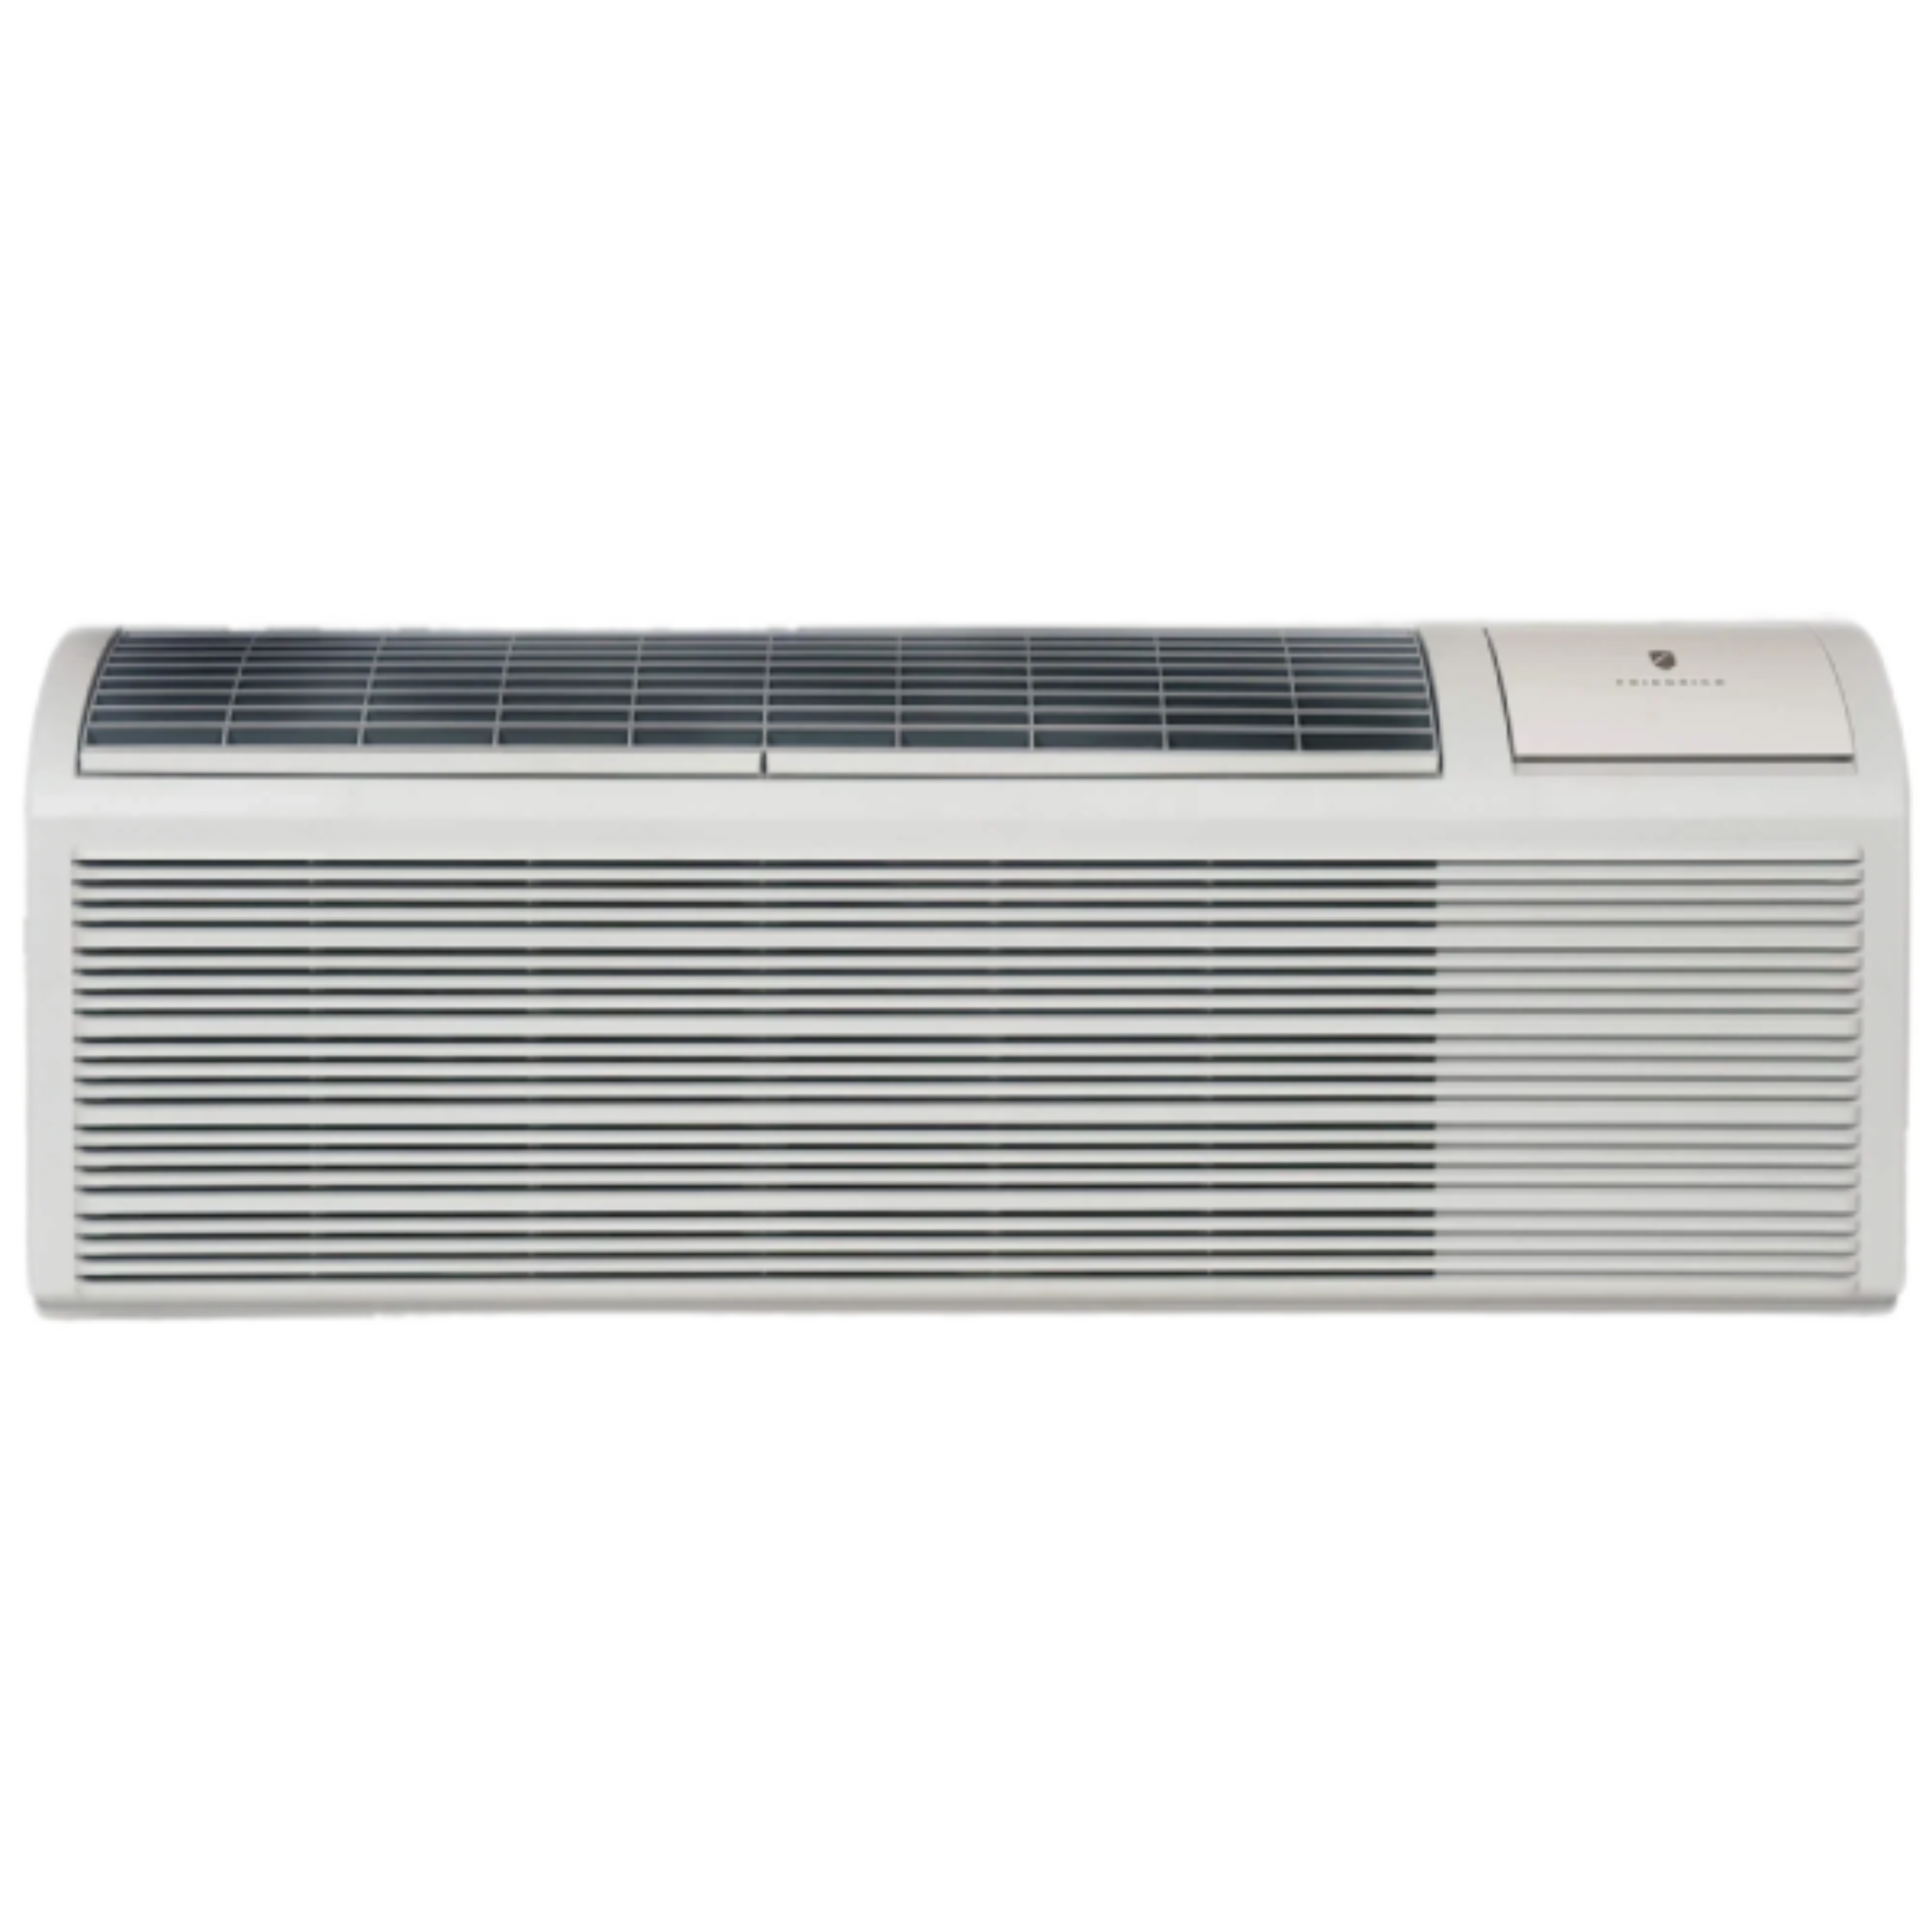 Friedrich ZoneAire Premier Packaged Terminal Air Conditioner with Electric Heat Model PDE09R3SG, 12.1 EER, 265 V, 355 CFM, 9400 BTU